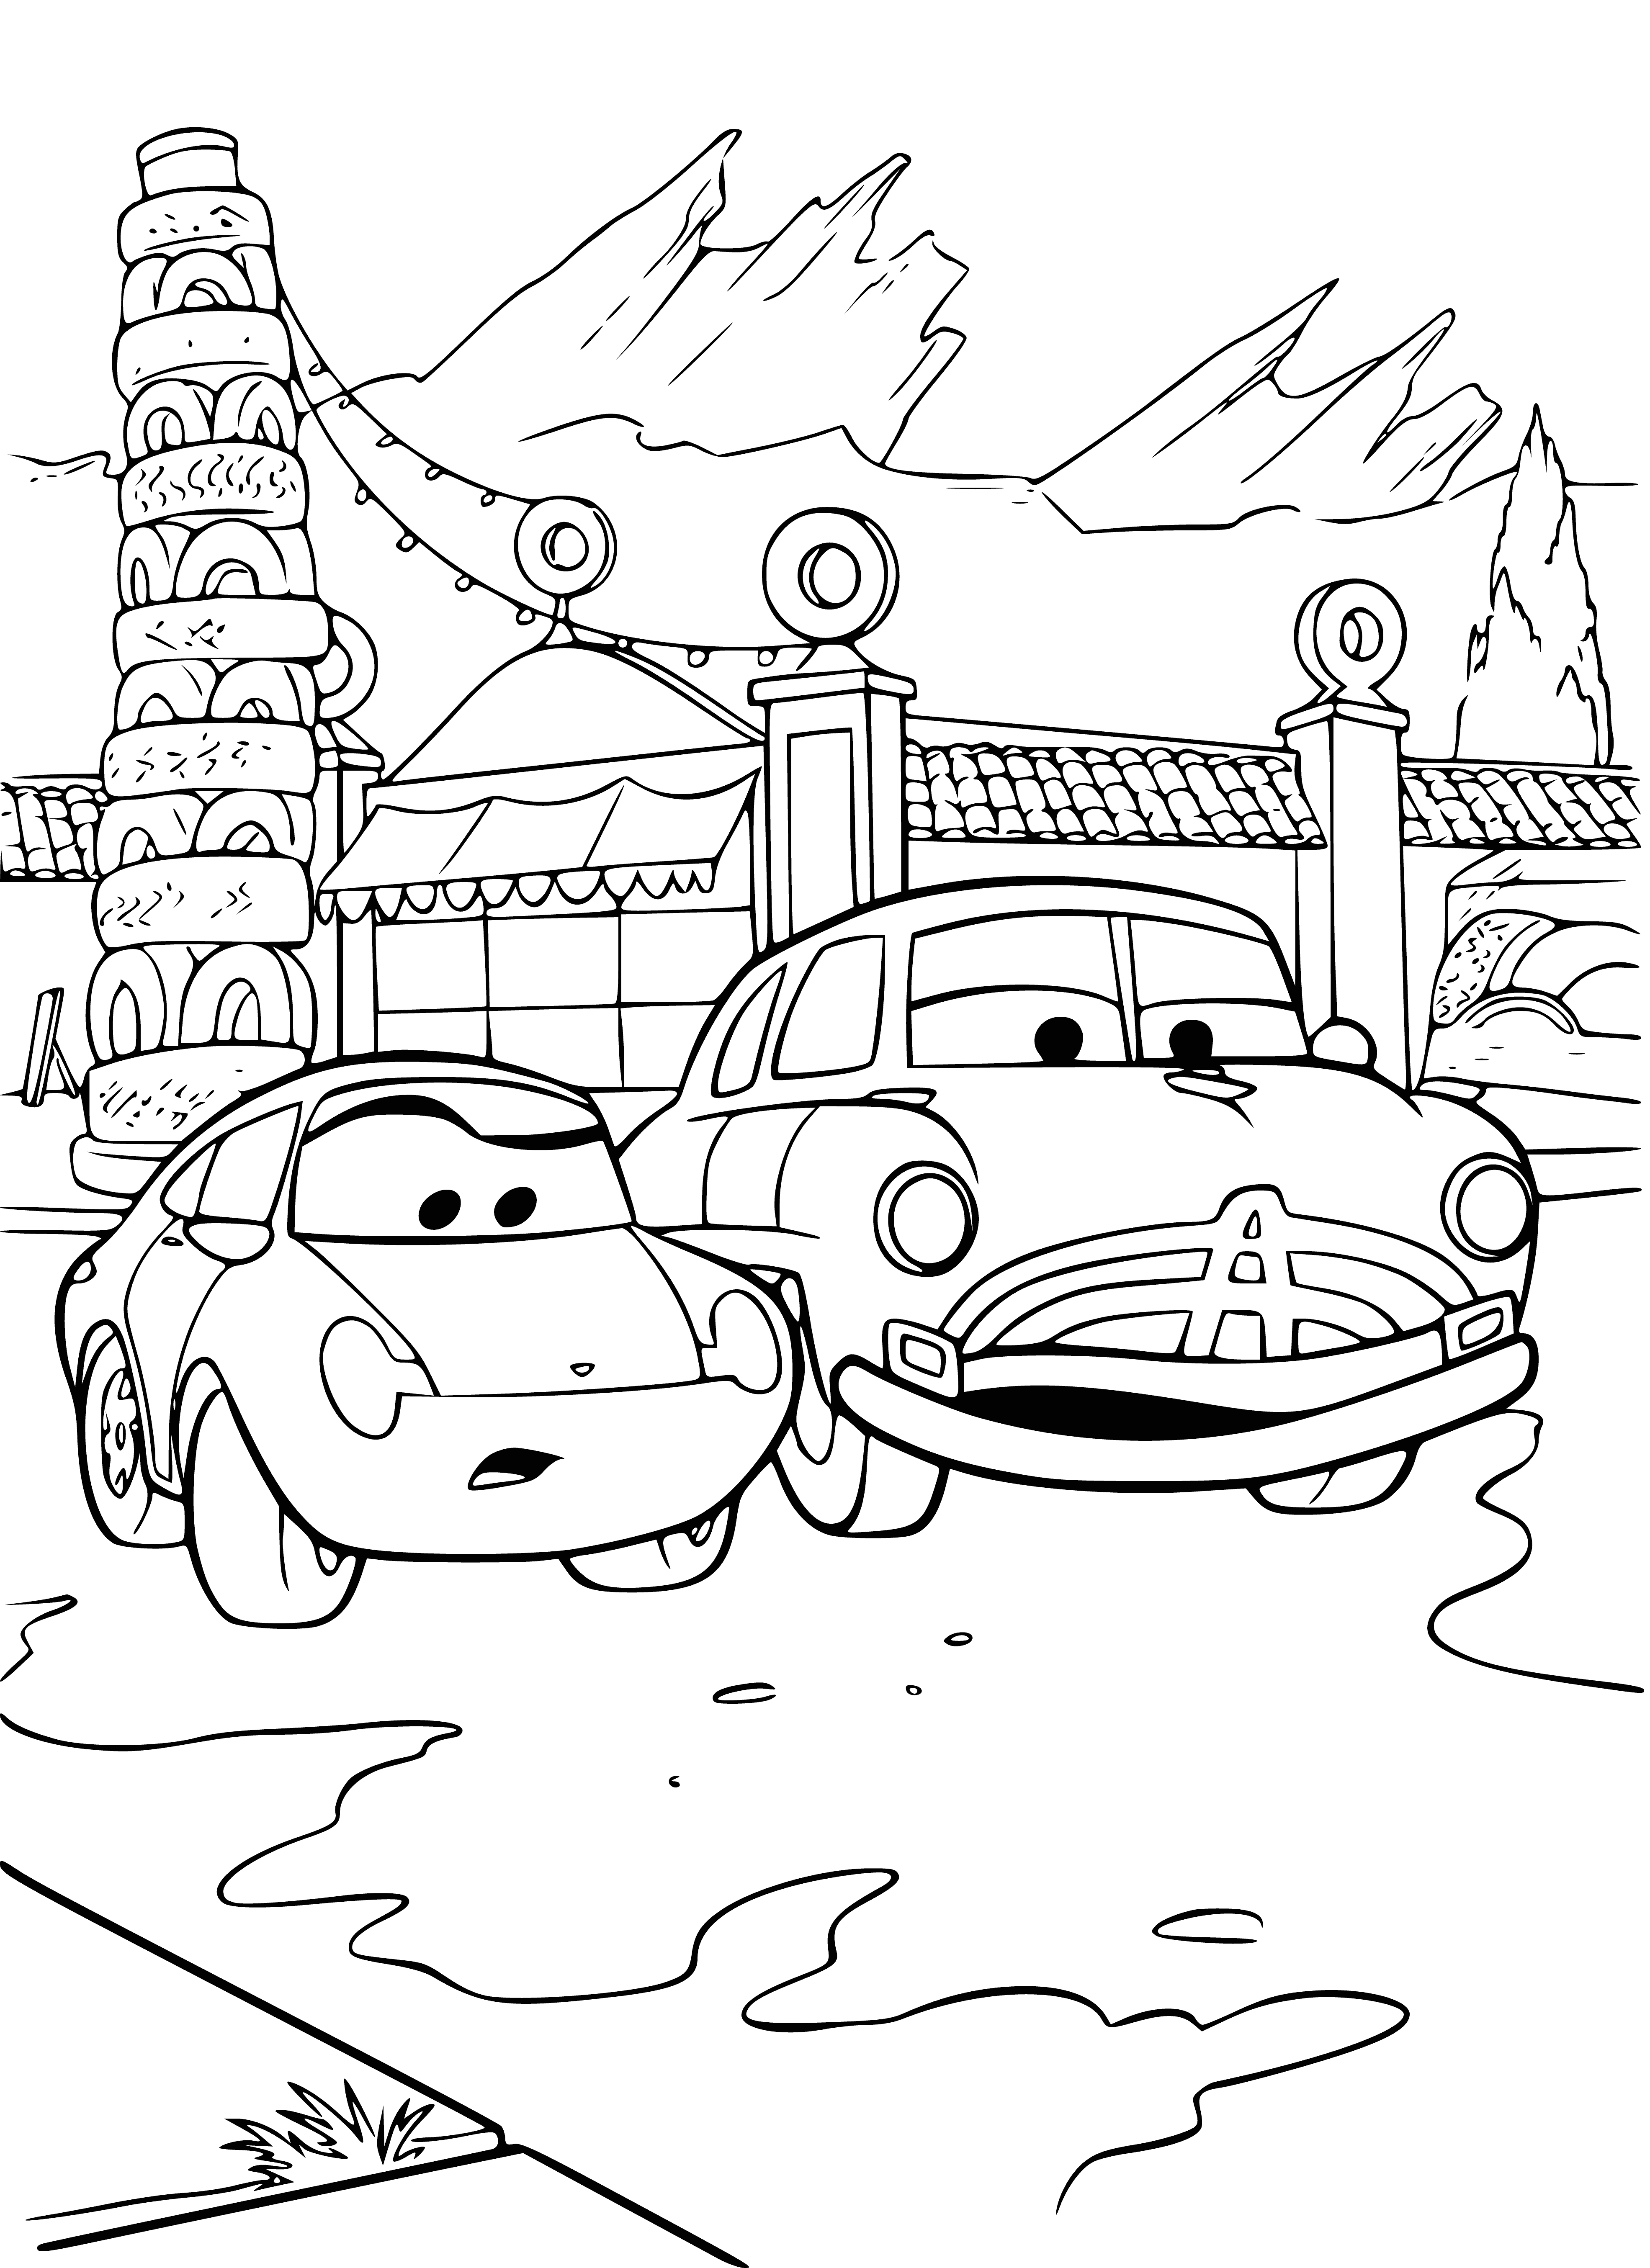 coloring page: Two cars, yellow & green stripes; blue with white stripes. #ColoringPage